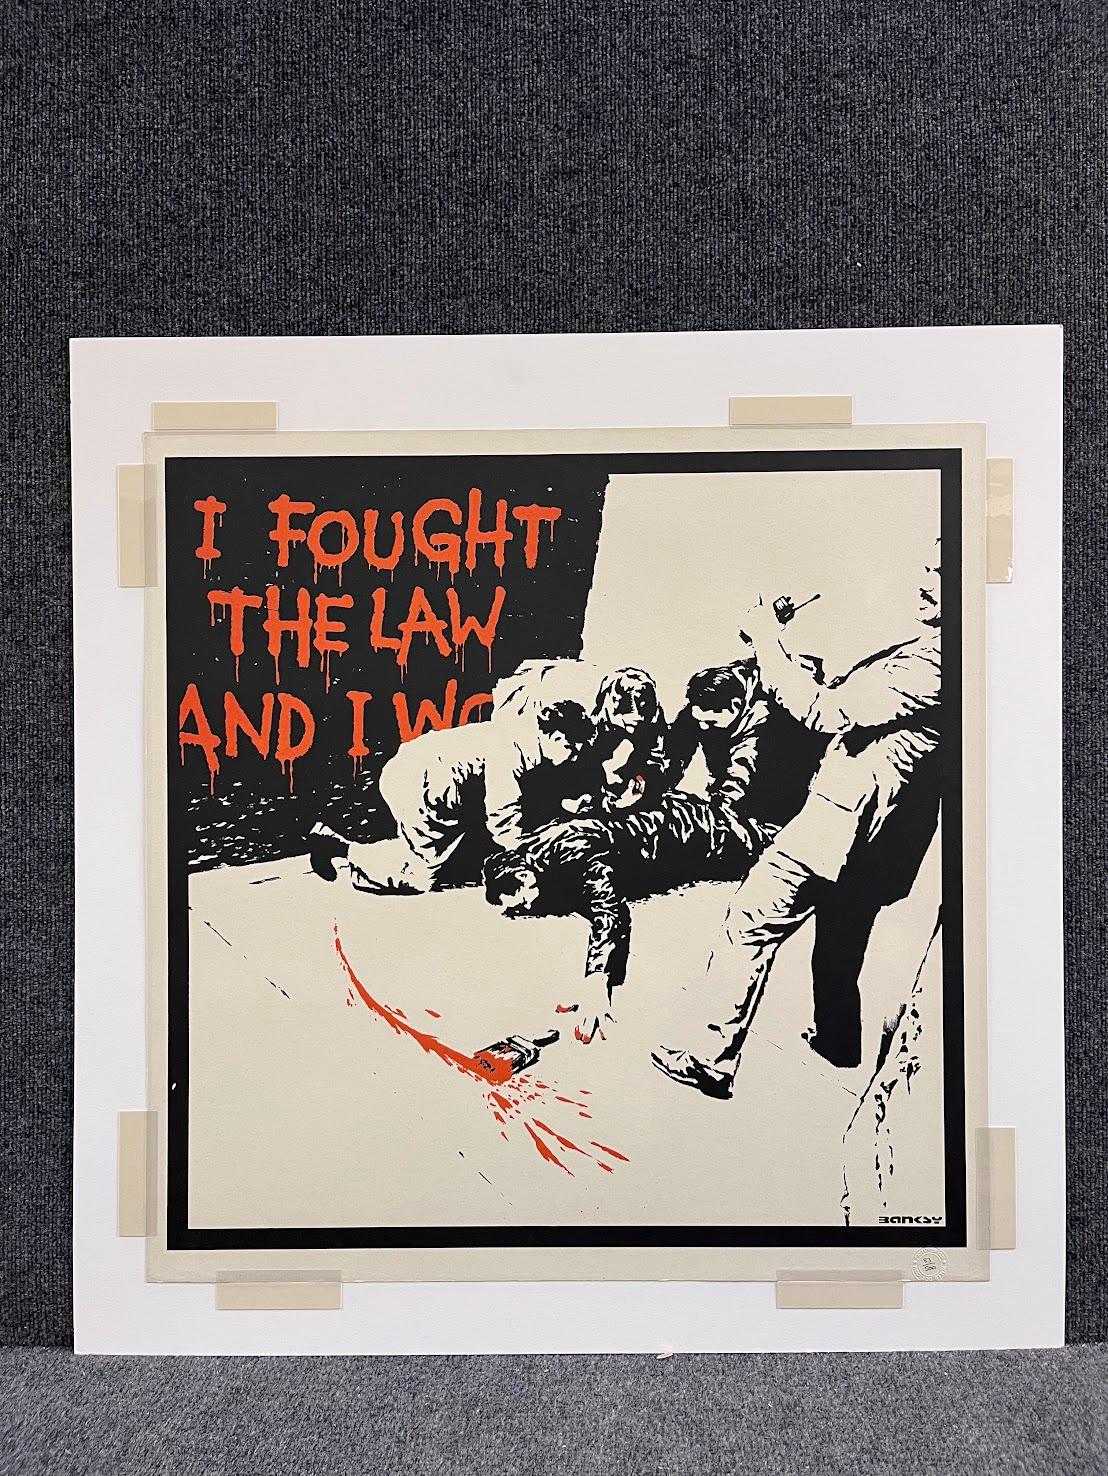 Banksy's 'I Fought the Law' is a 2004 color screenprint, editioned 83/500 in pencil and stamped with the Pictures on Walls, London blindstamp. This magnificent work is in excellent condition measuring 27 3/4 x 27 1/2 in. 

This piece is in excellent